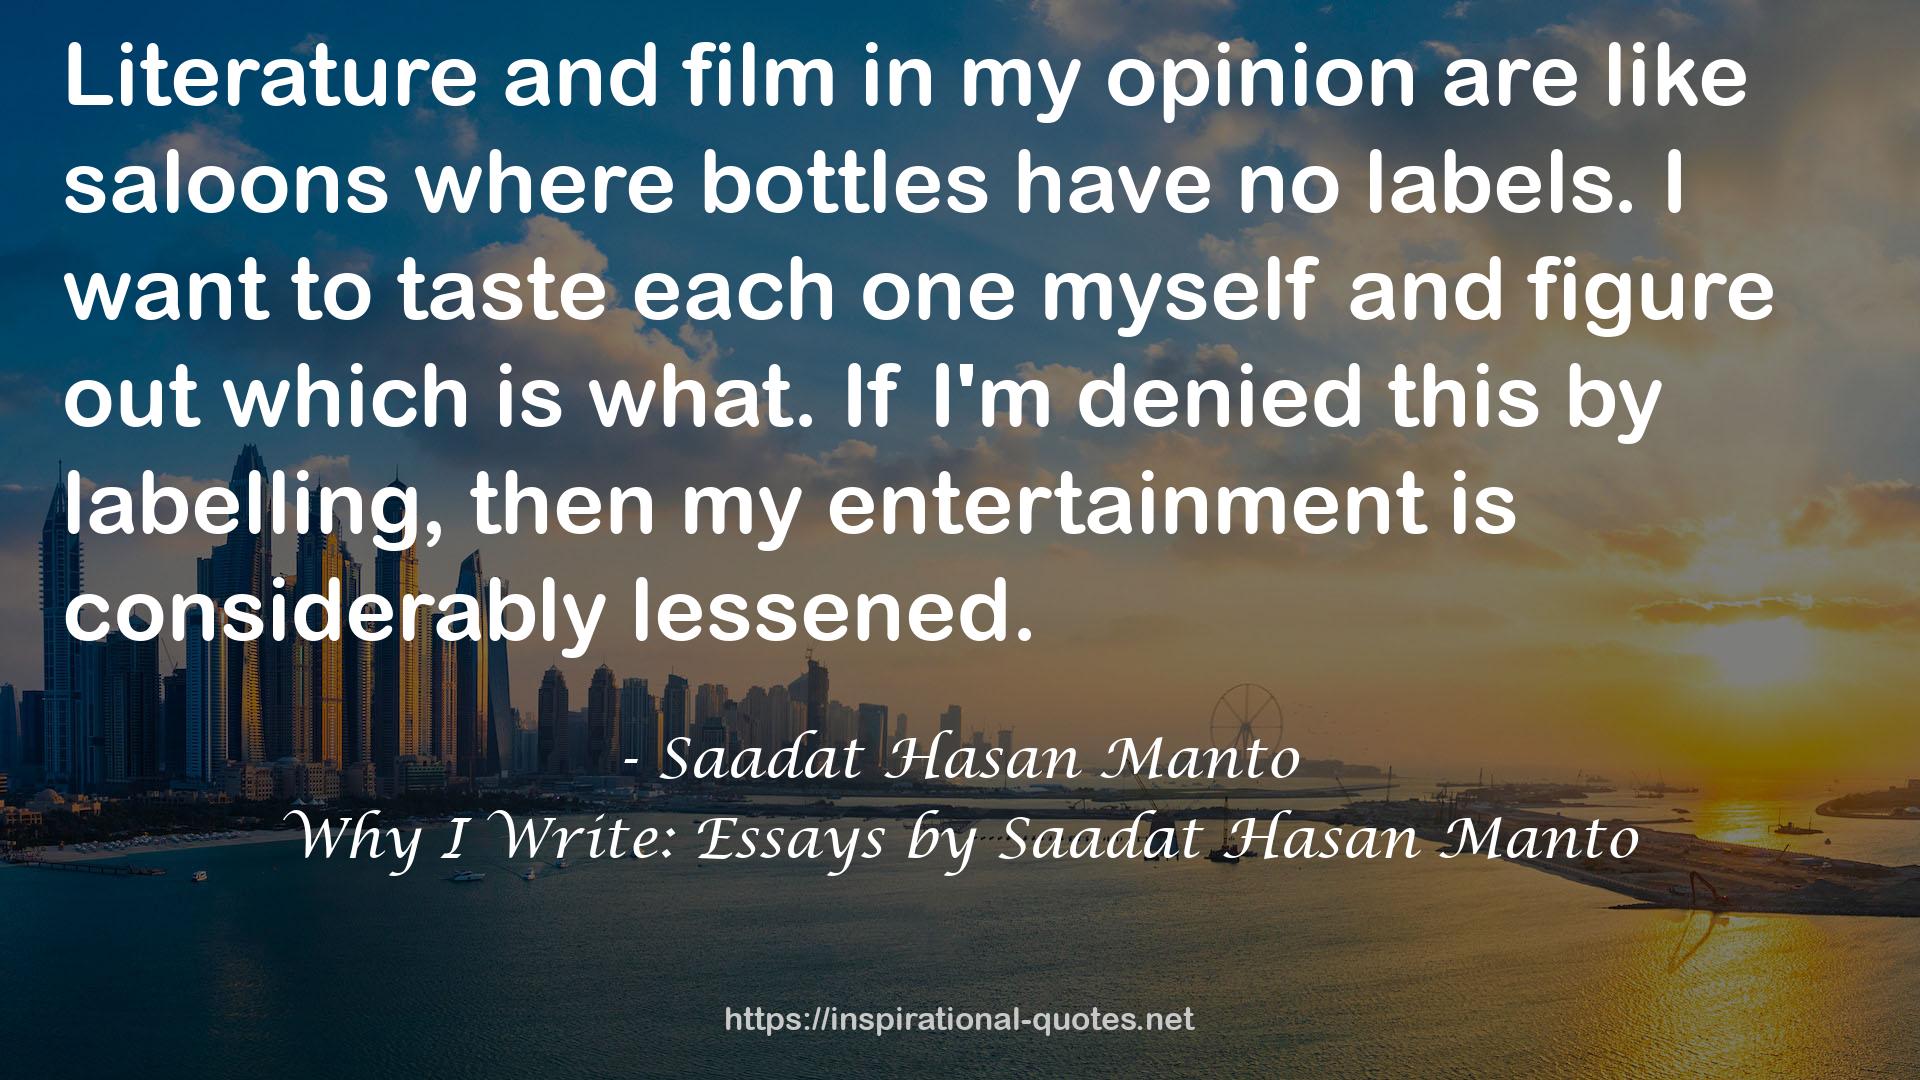 Why I Write: Essays by Saadat Hasan Manto QUOTES